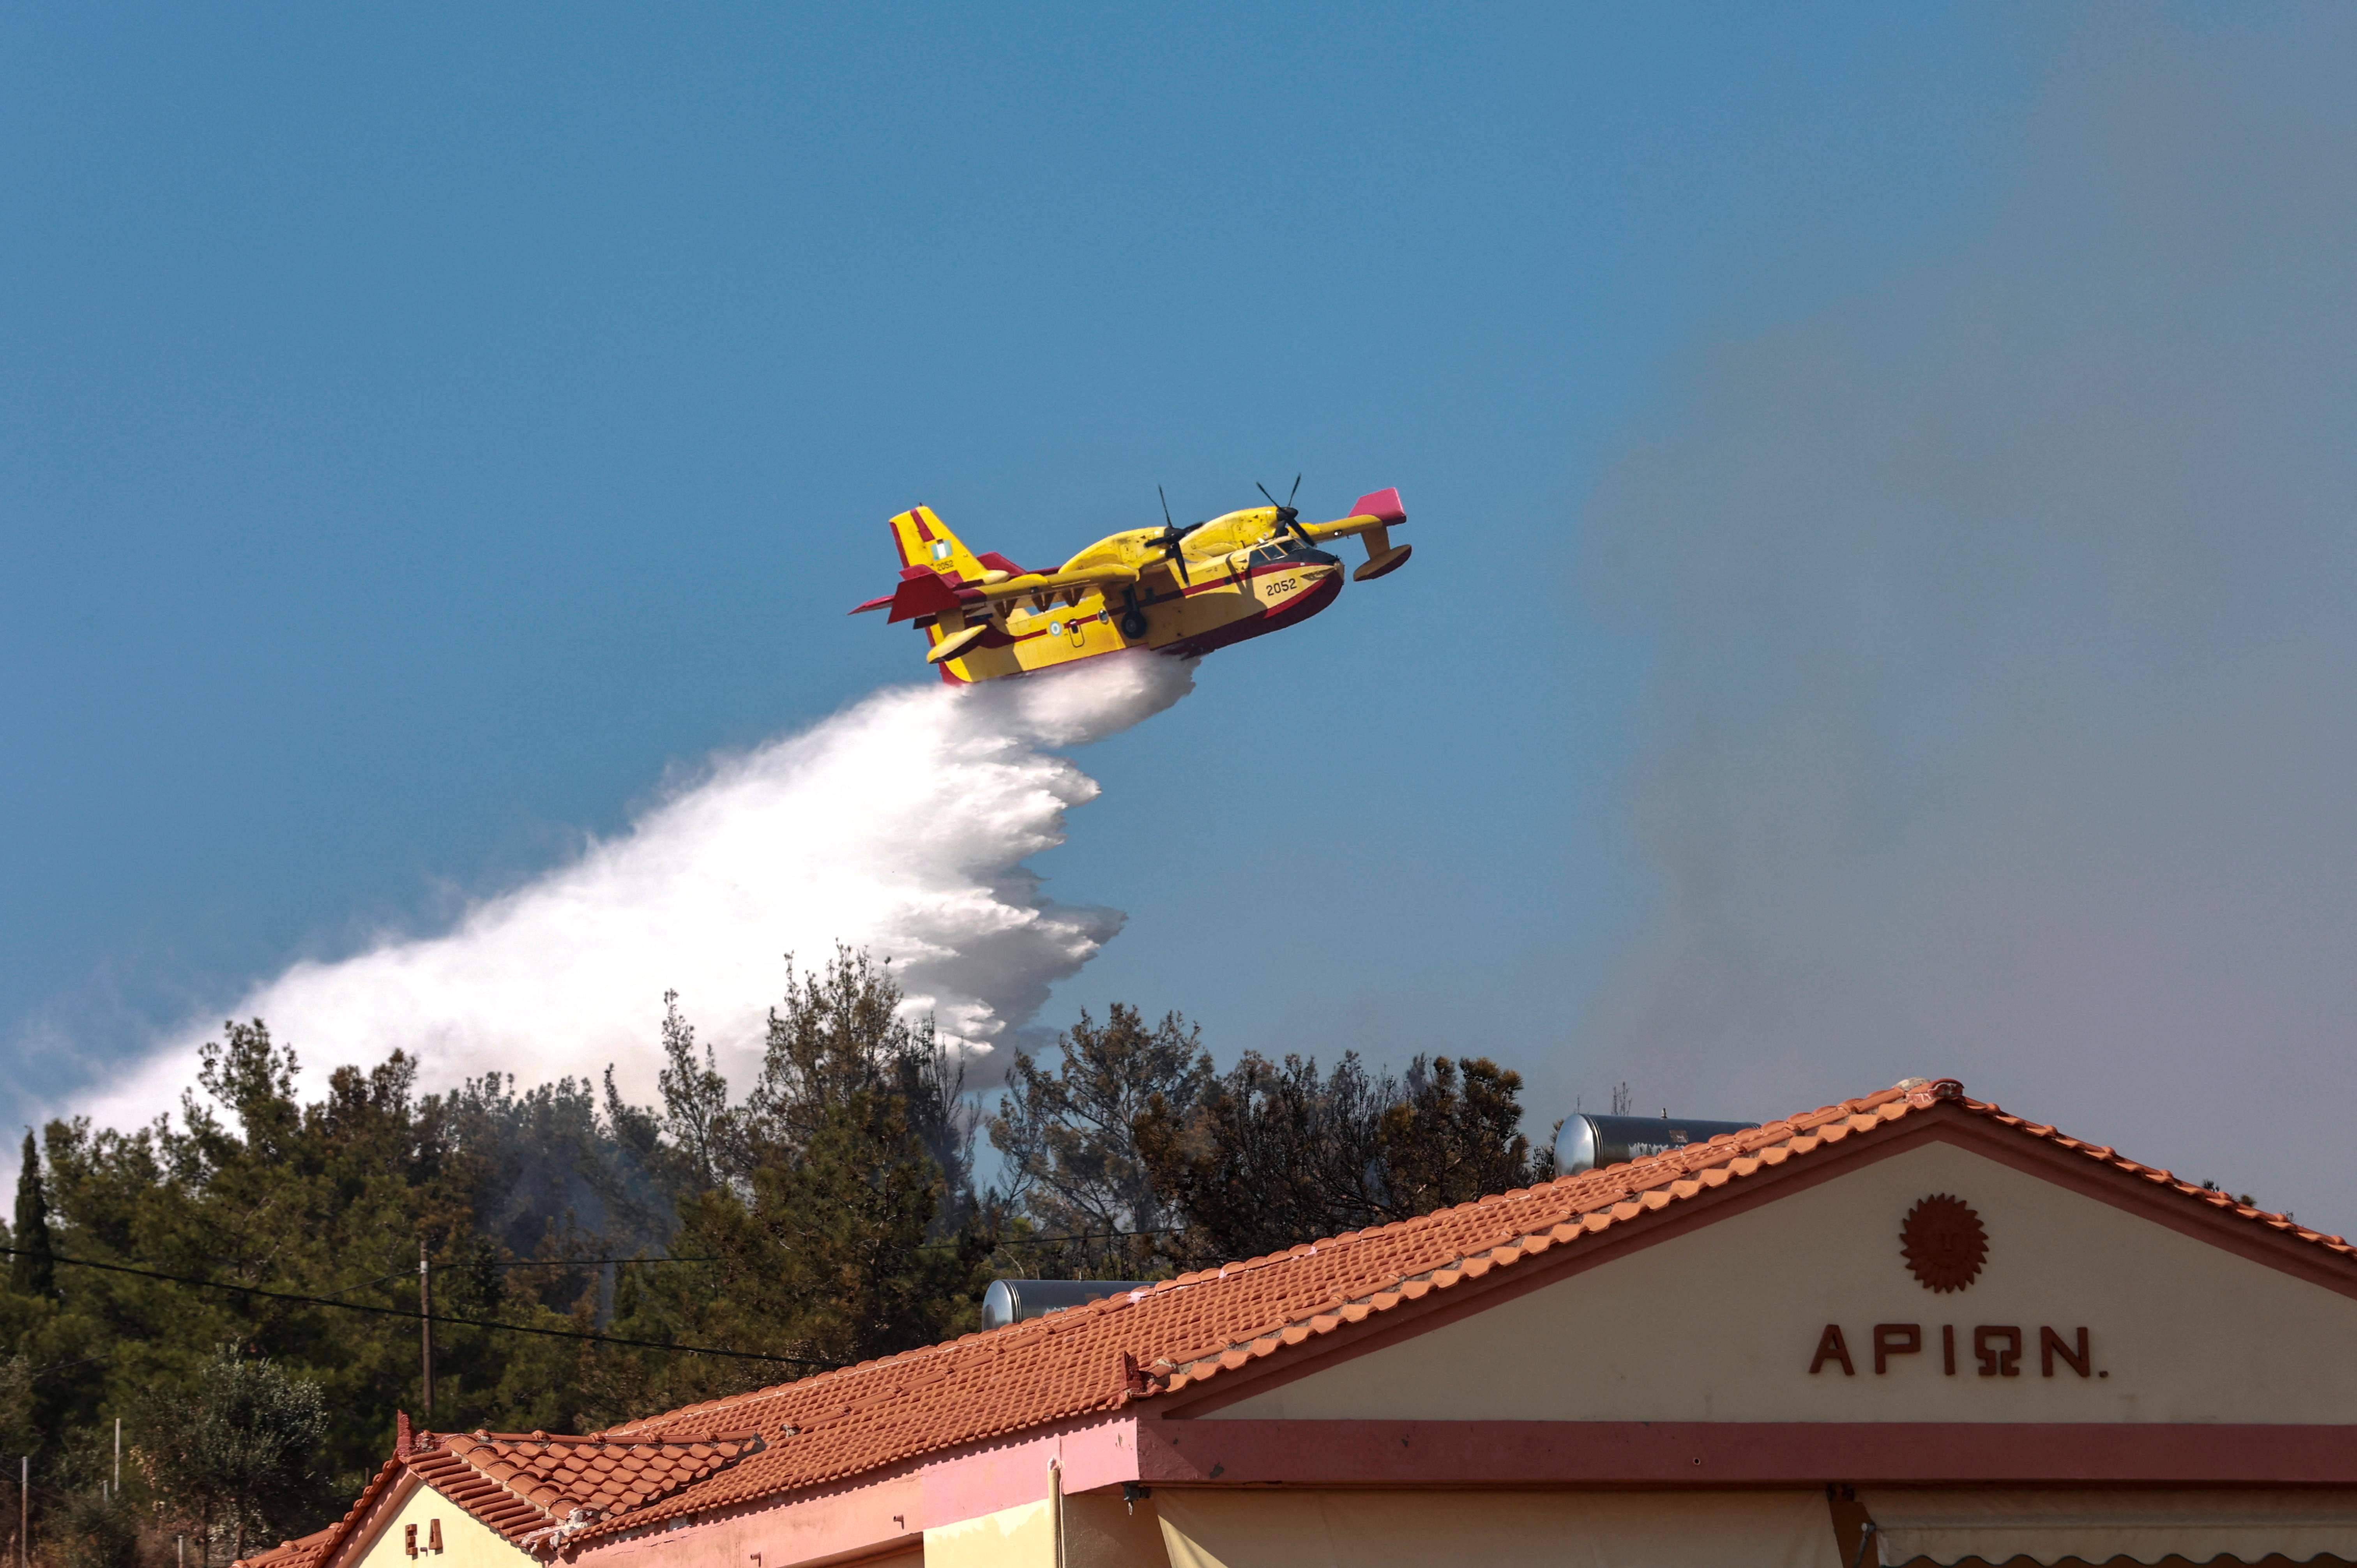 A canadair firefighting plane drops water at the wildfire approaching homes and hotels at Vatera coastal resort